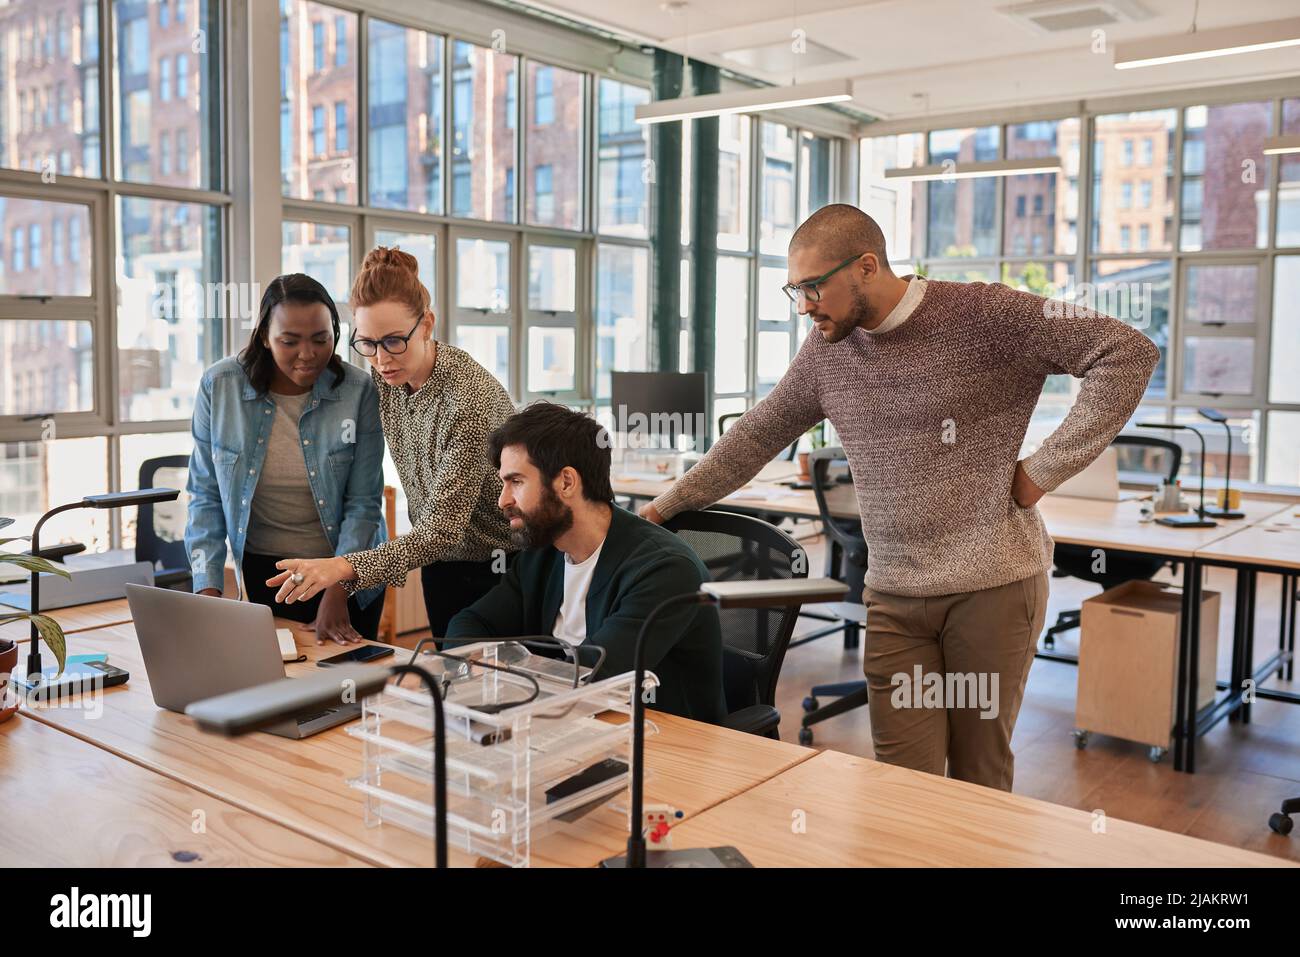 Diverse group of focused businesspeople working together on a laptop Stock Photo